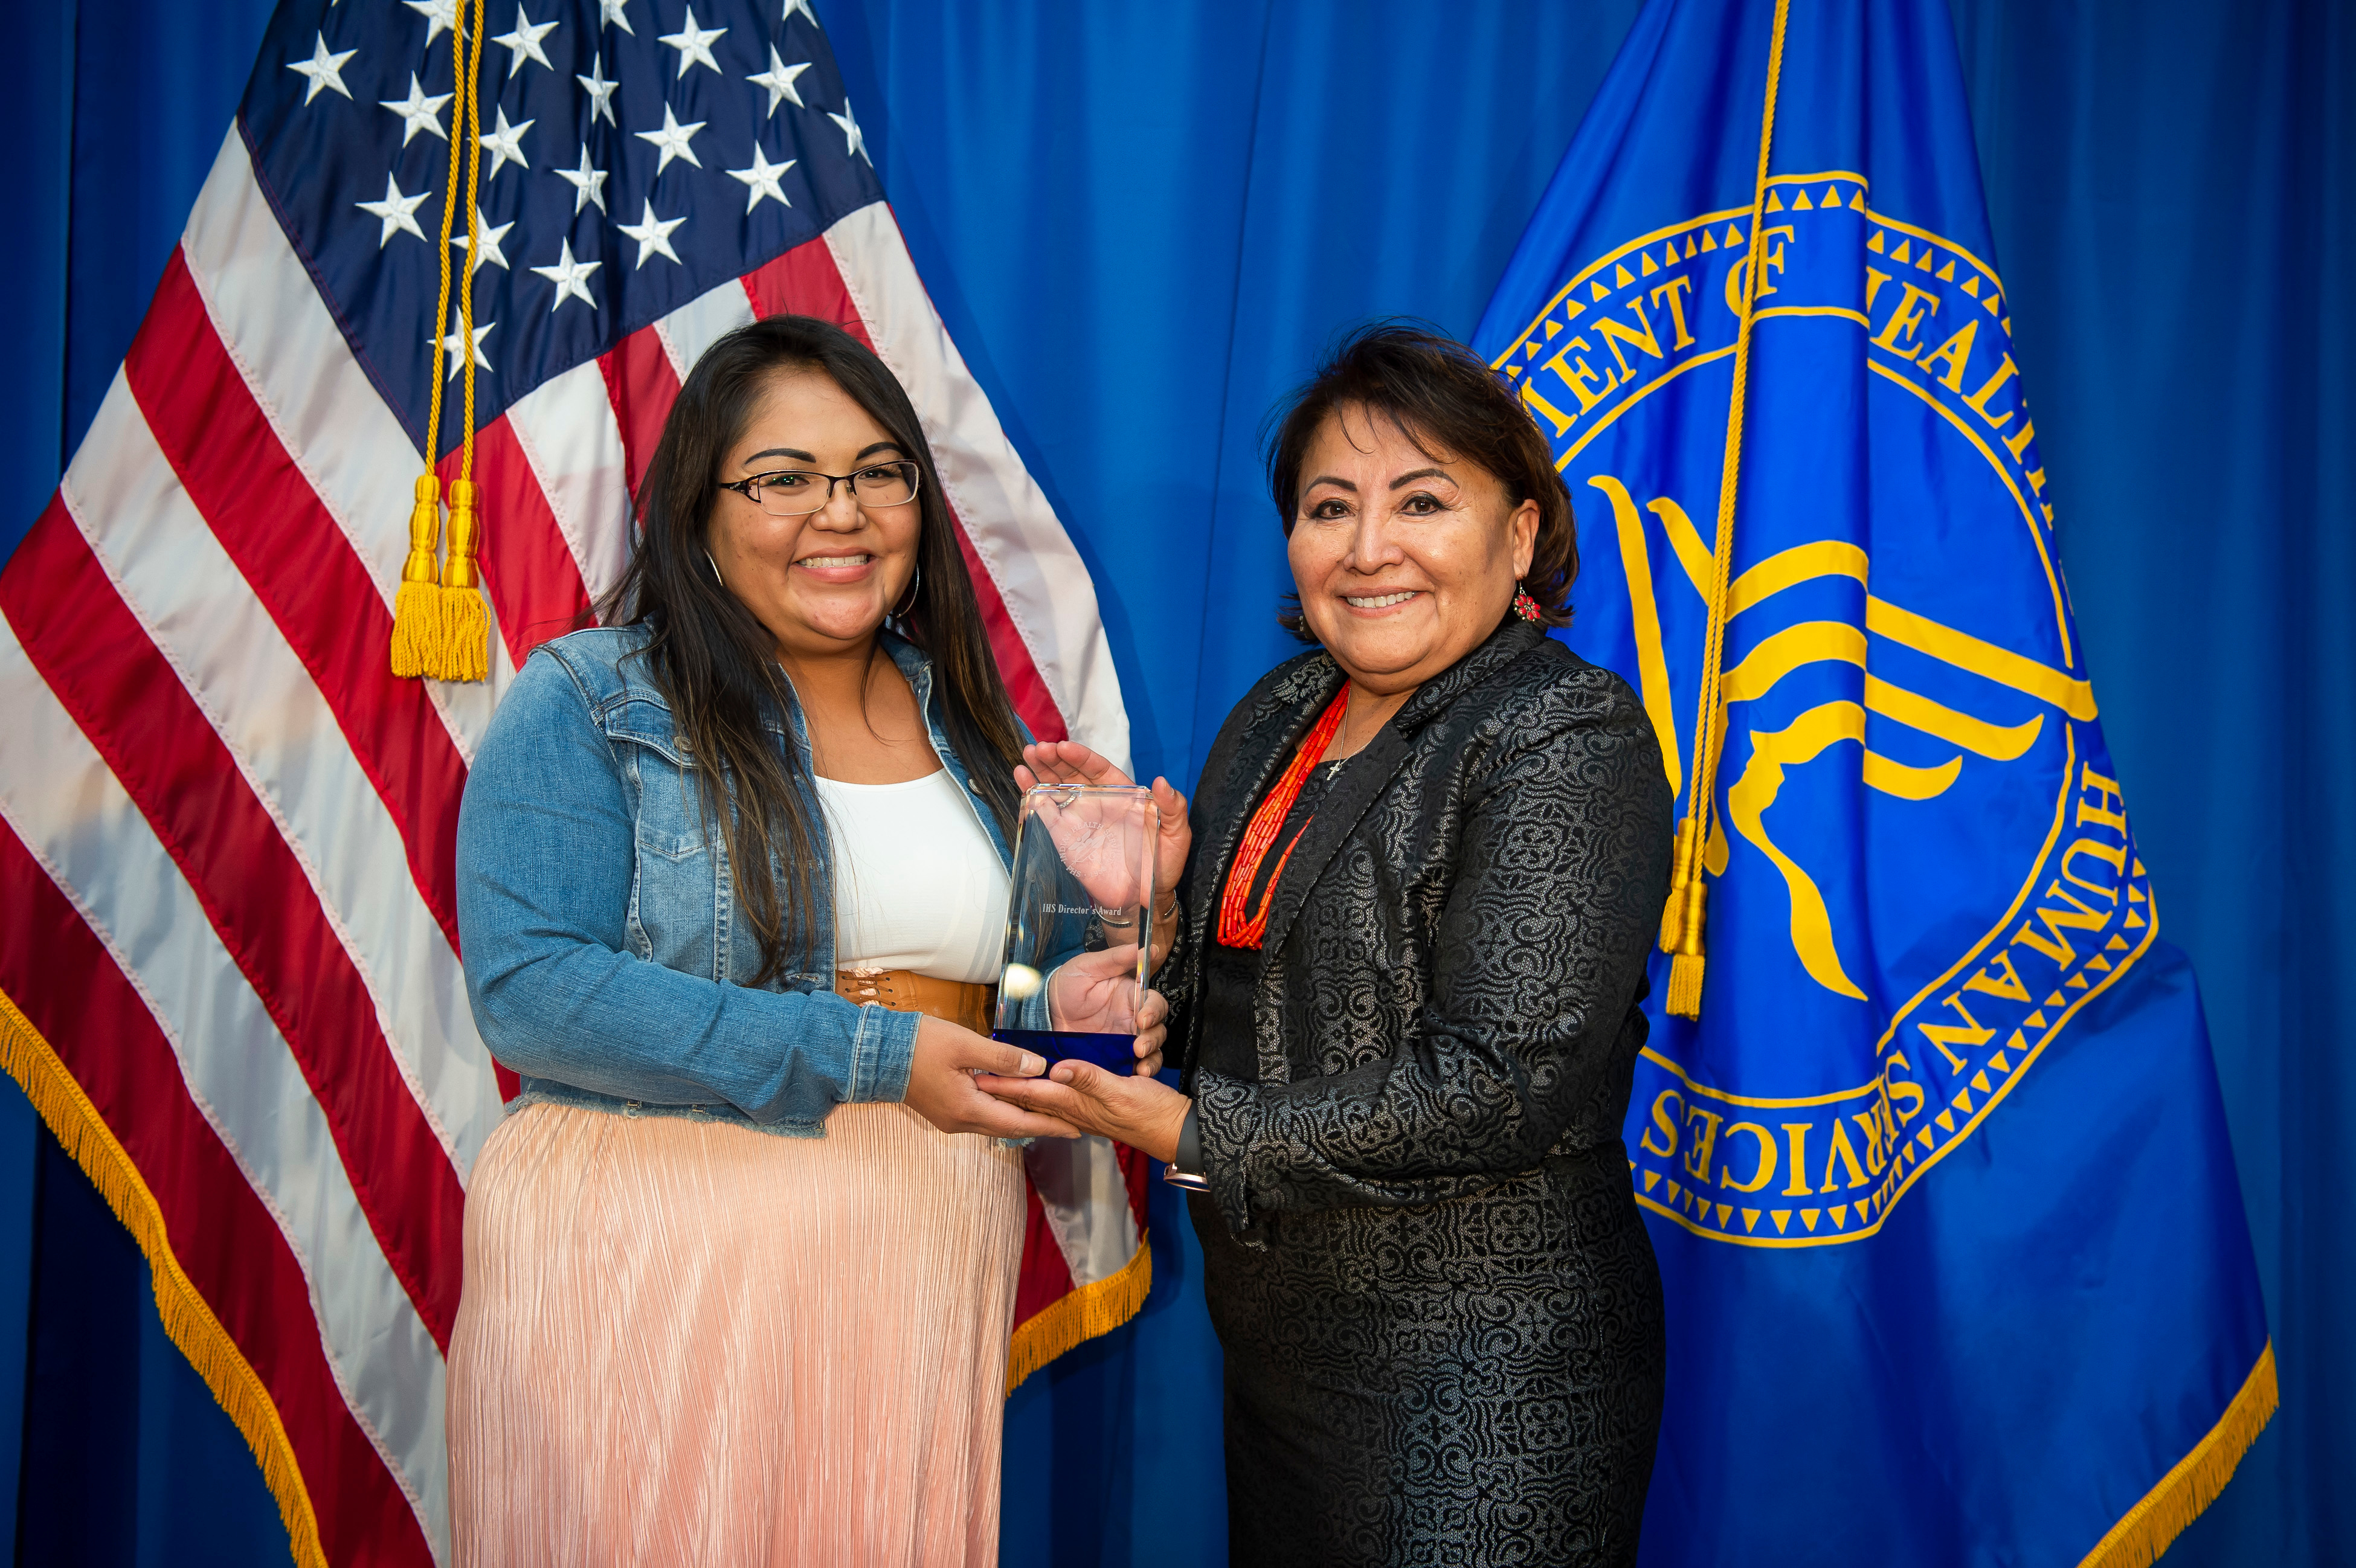 Pandemic Heroism - Team Category - Tracey Yazzie receiving on behalf of Chinle SU Mass Vaccination Team (Navajo)